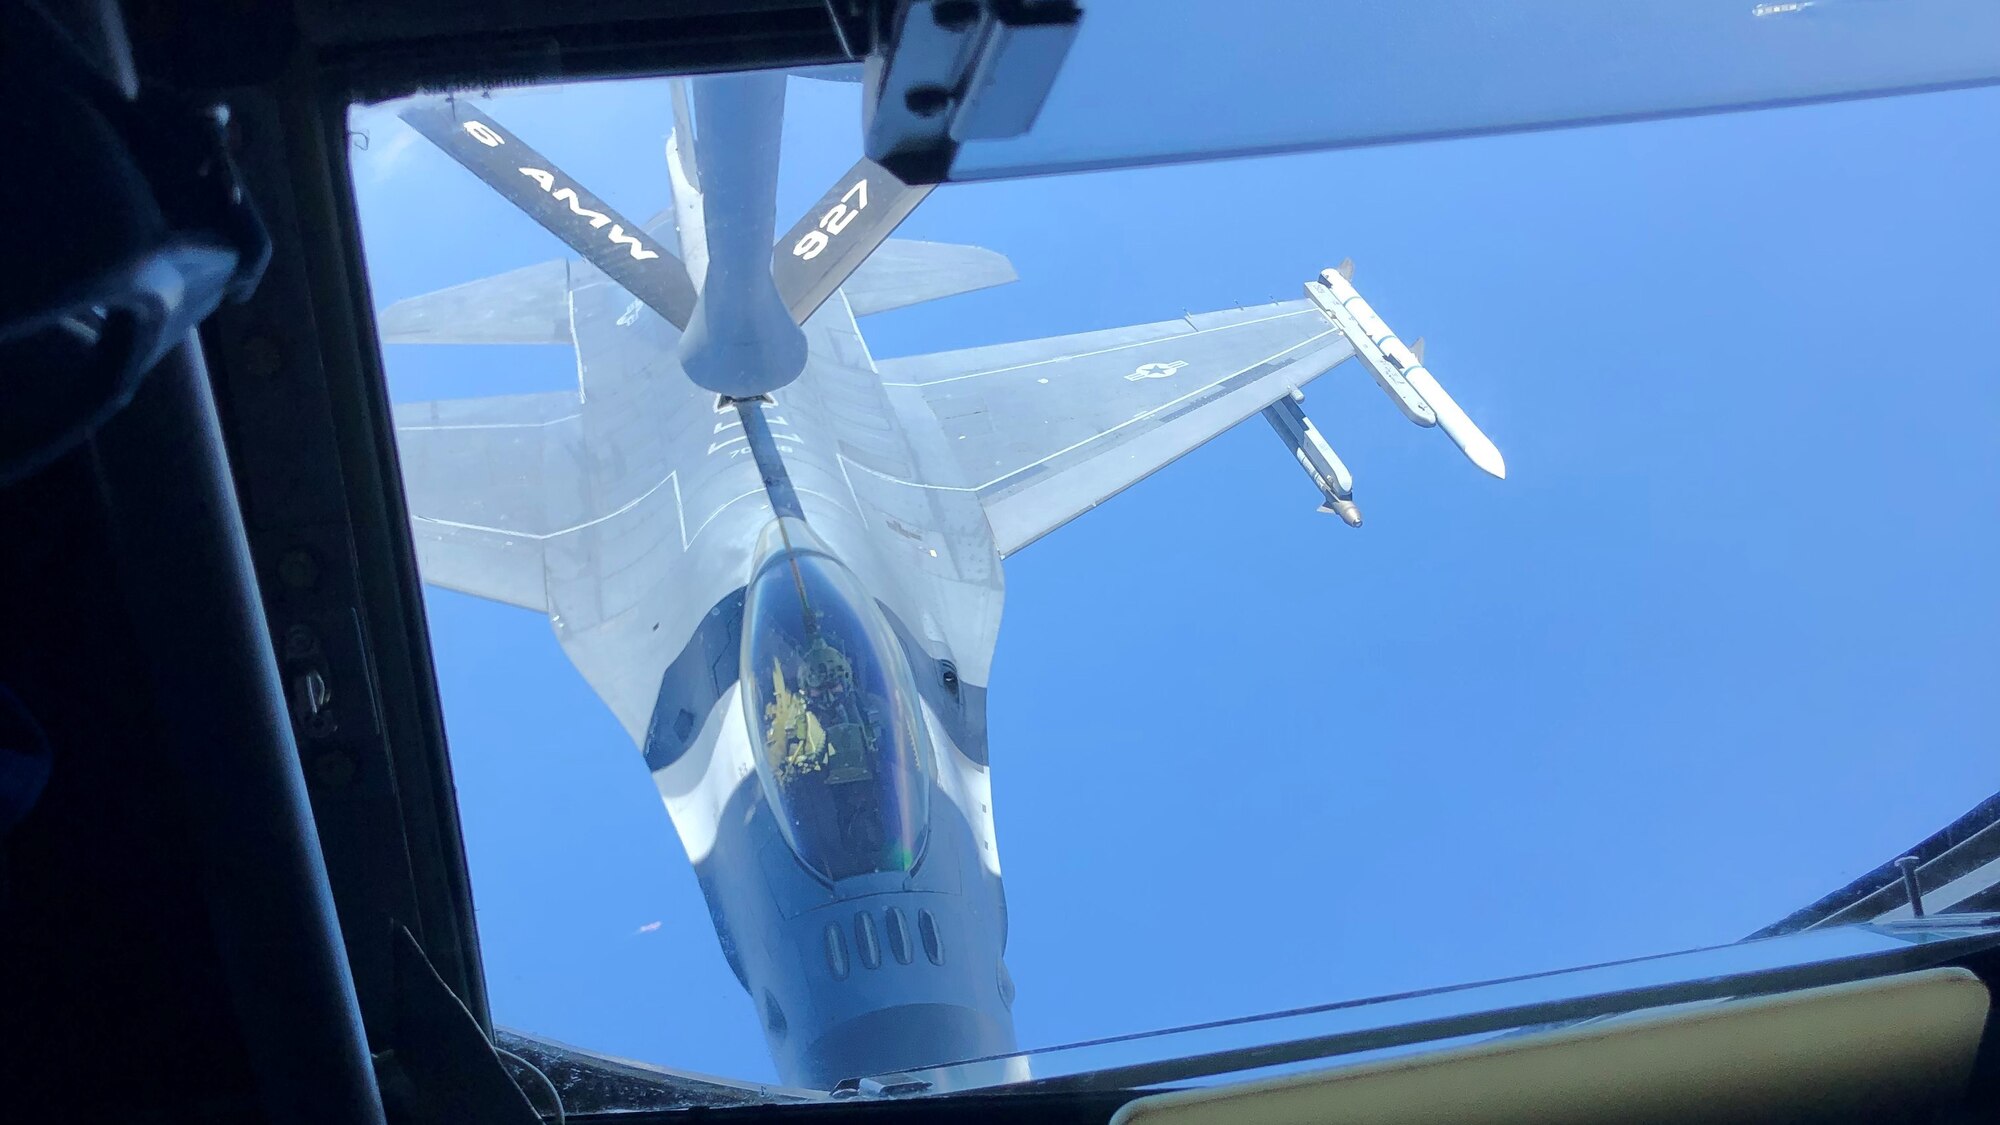 An F-16 Fighting Falcon aircraft assigned to Homestead Air Reserve Base, Fla., conducts aerial refueling training with a KC-135 Stratotanker aircraft from the 6th Air Refueling Wing, MacDill Air Force Base, Fla. Apr. 15, 2019 over the Atlantic Ocean.